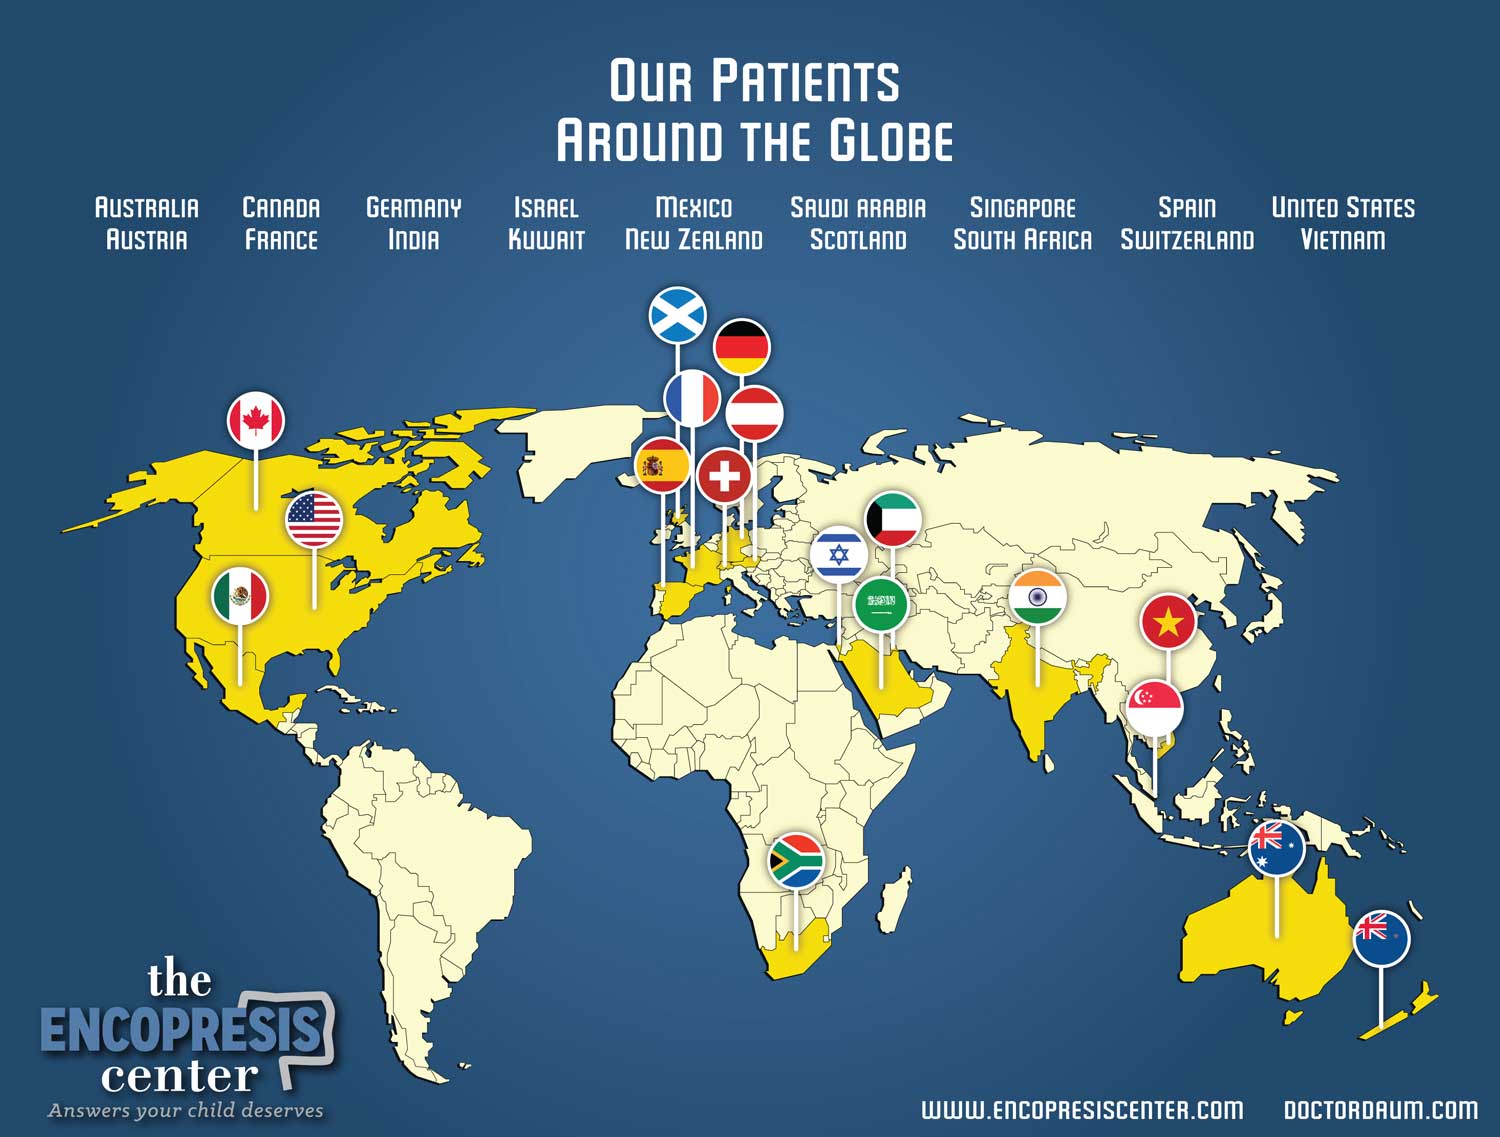 Our Patients Around the Globe